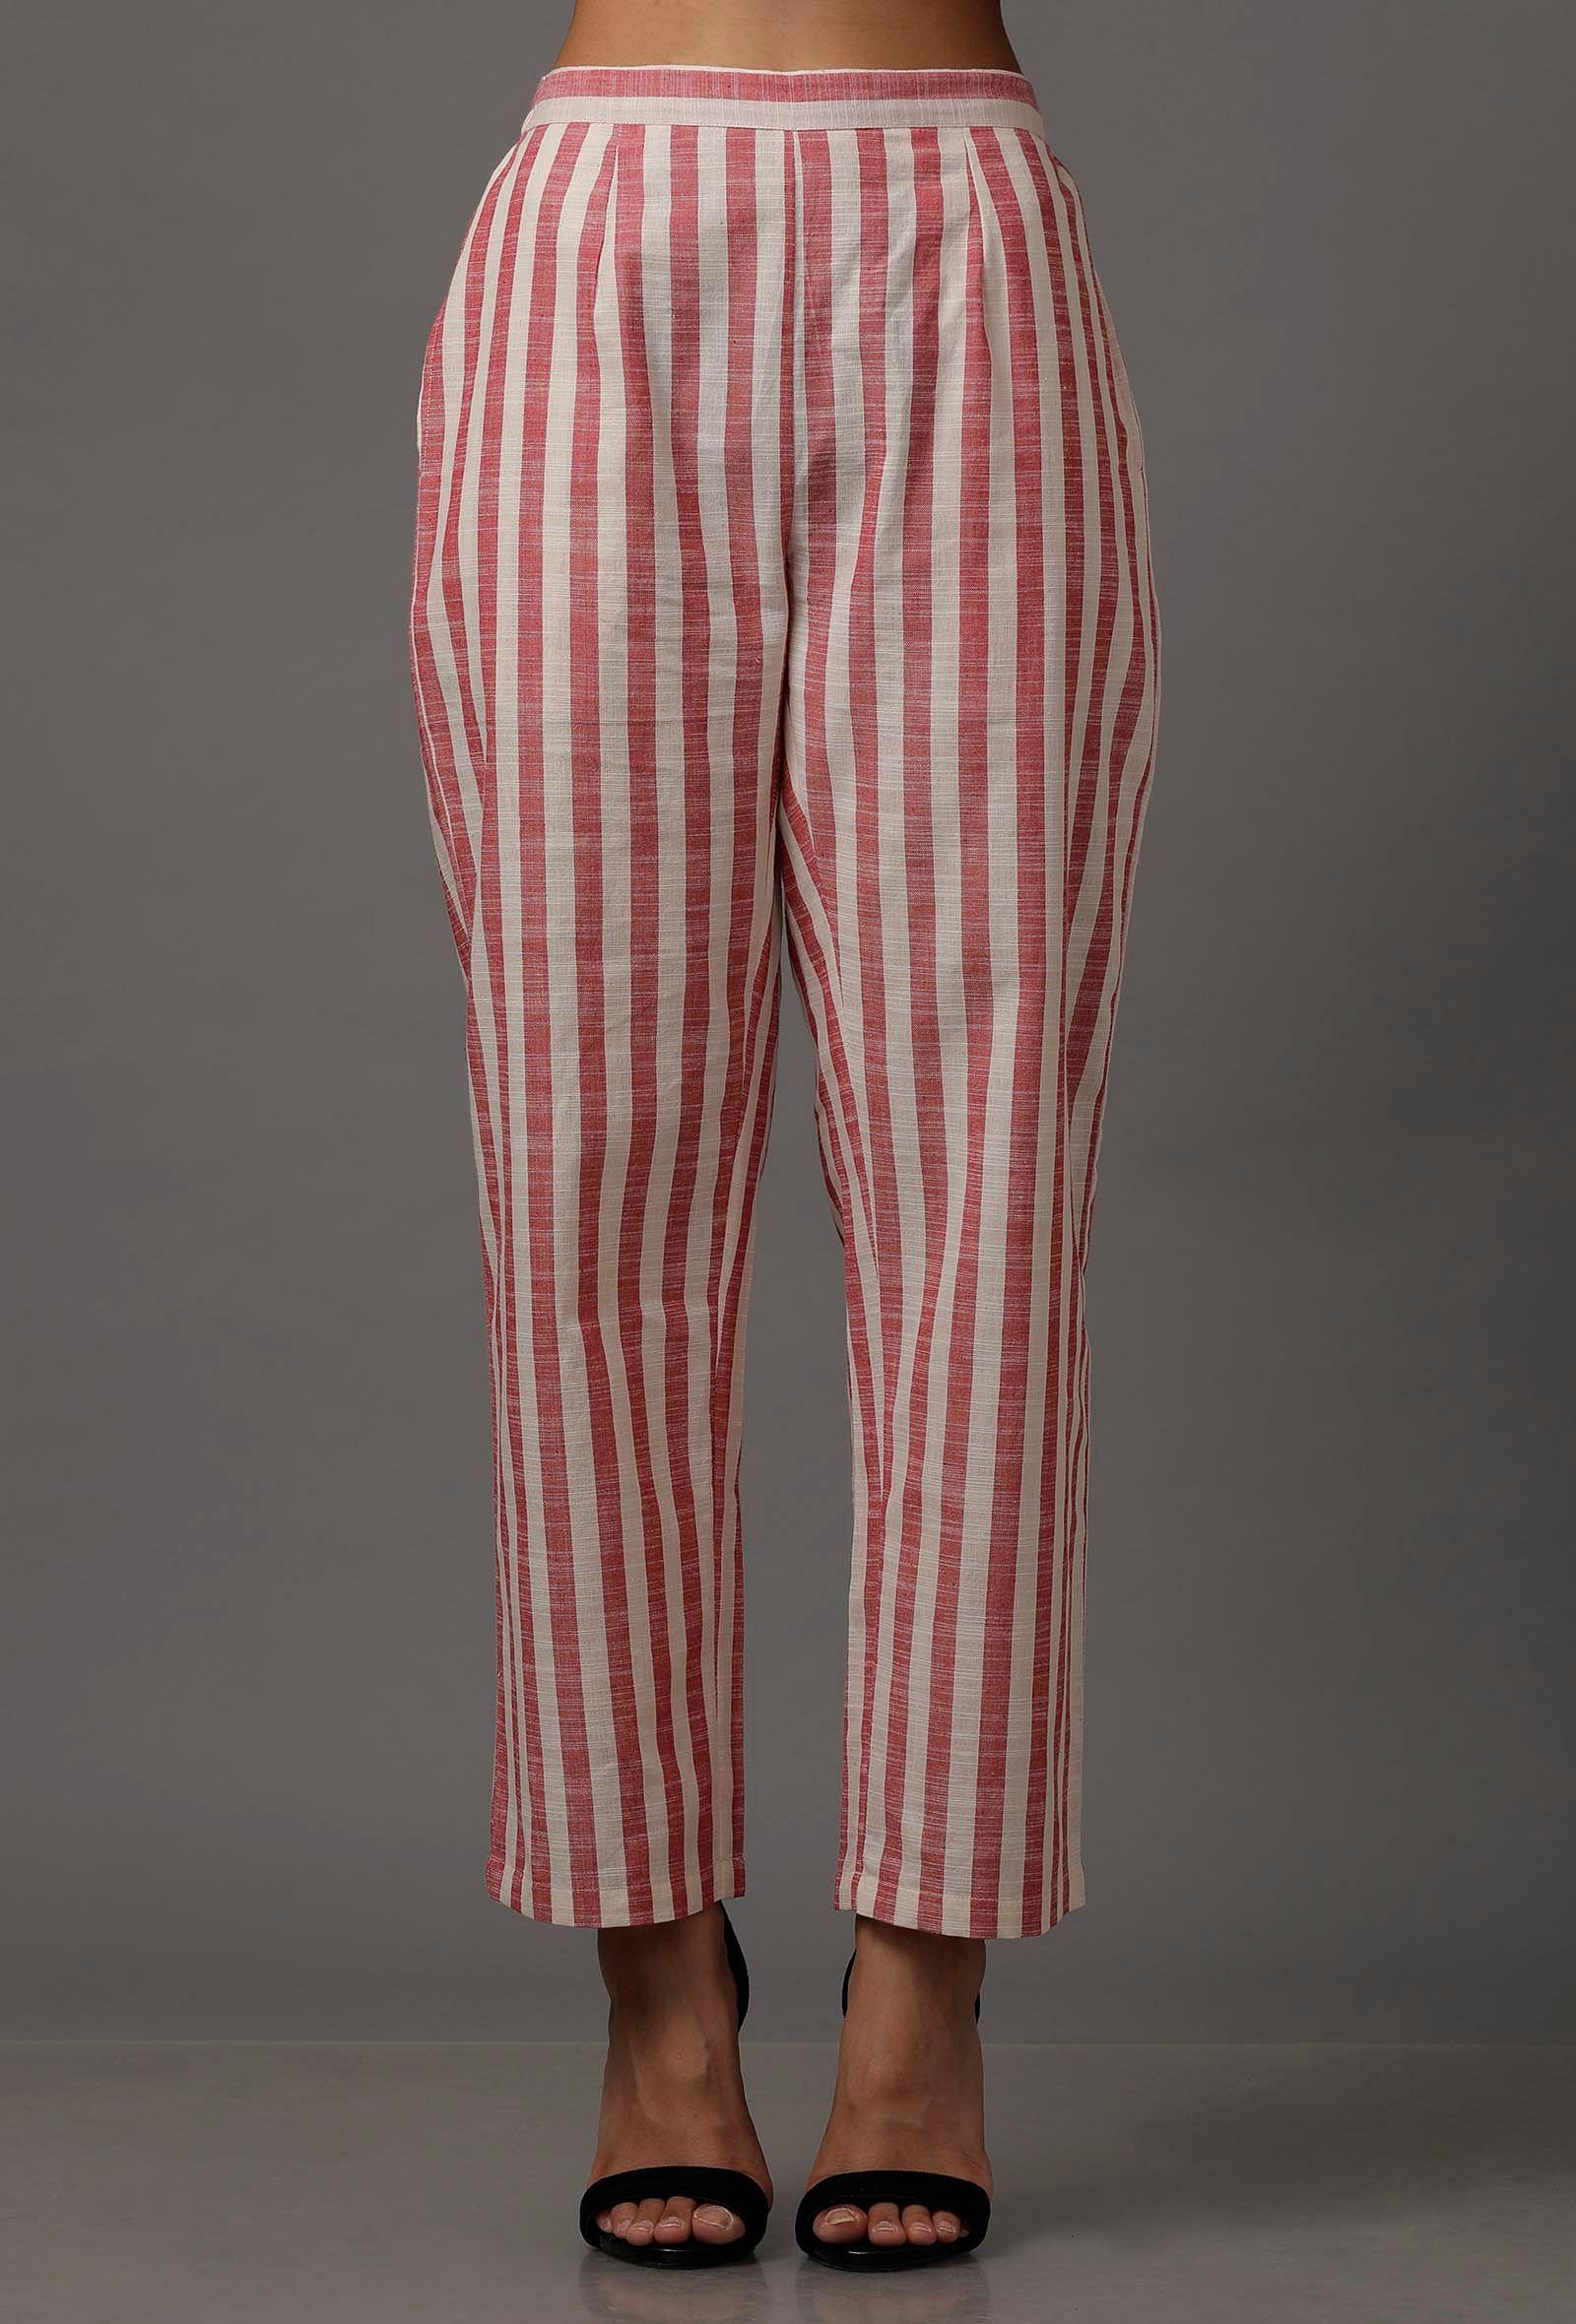 peach--red-and-white-stripes-pure-woven-cotton-pants